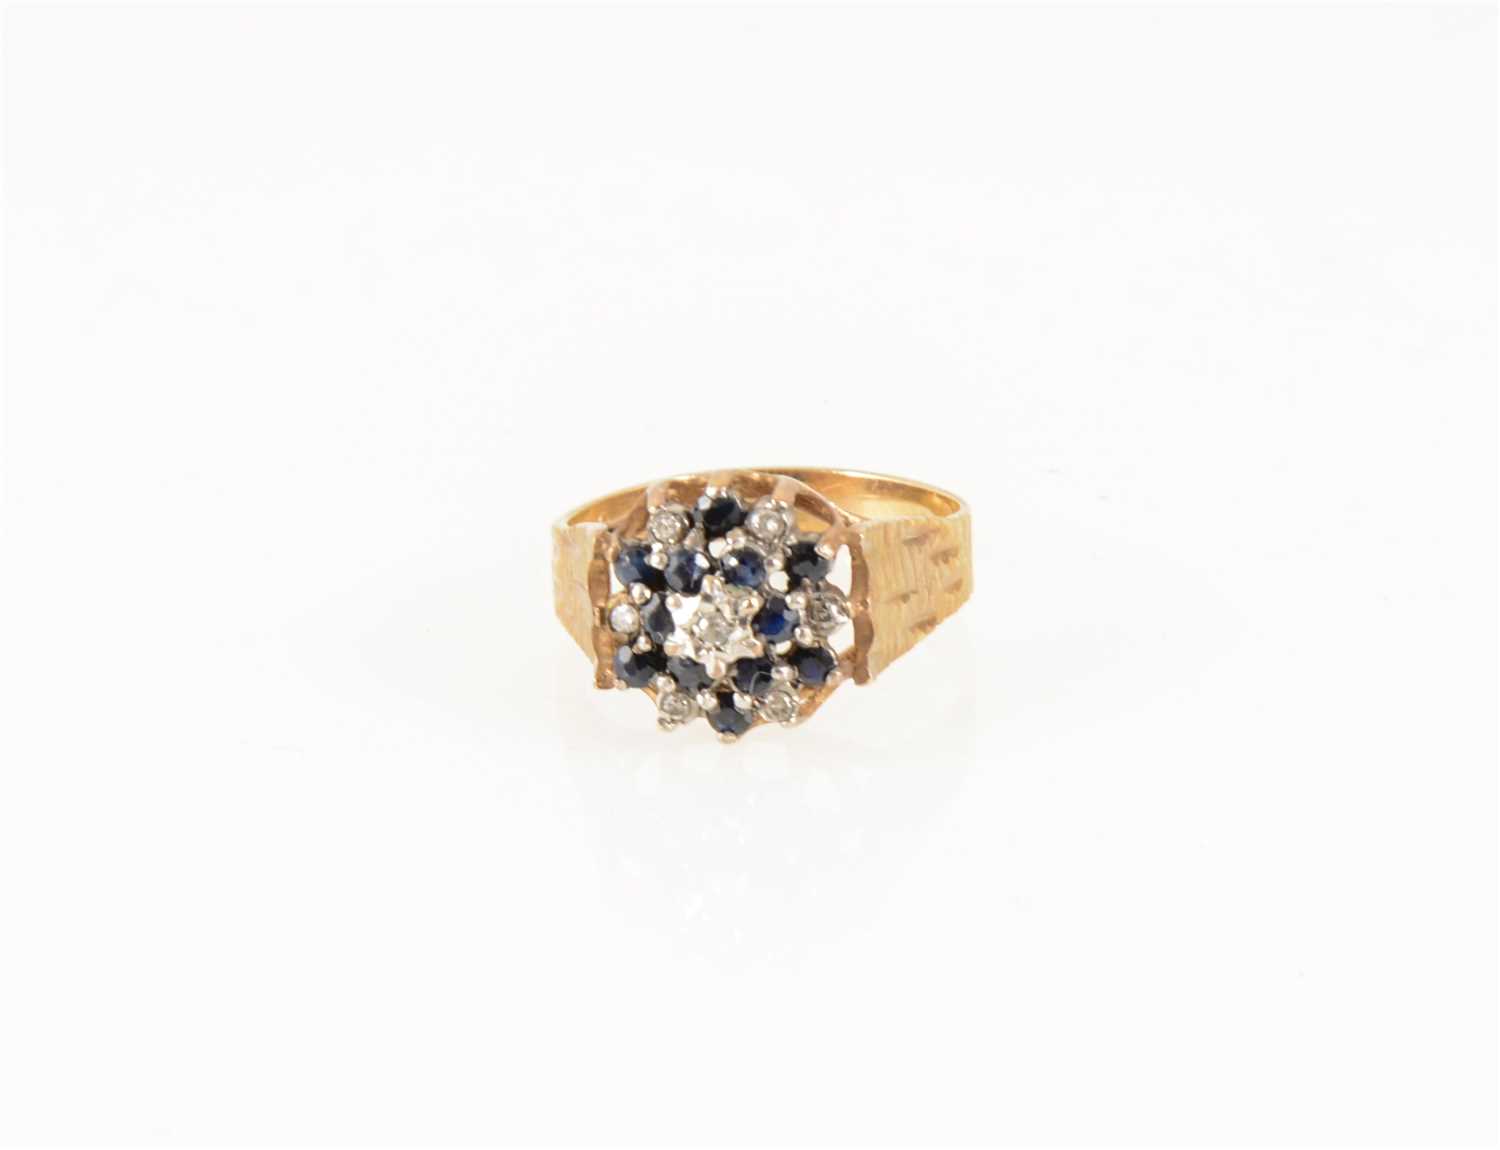 Lot 176 - A sapphire and diamond circular cluster ring, twelve sapphires claw set, seven diamond points illusion set in a 9 carat yellow and white gold mount with wide bark textured shoulders